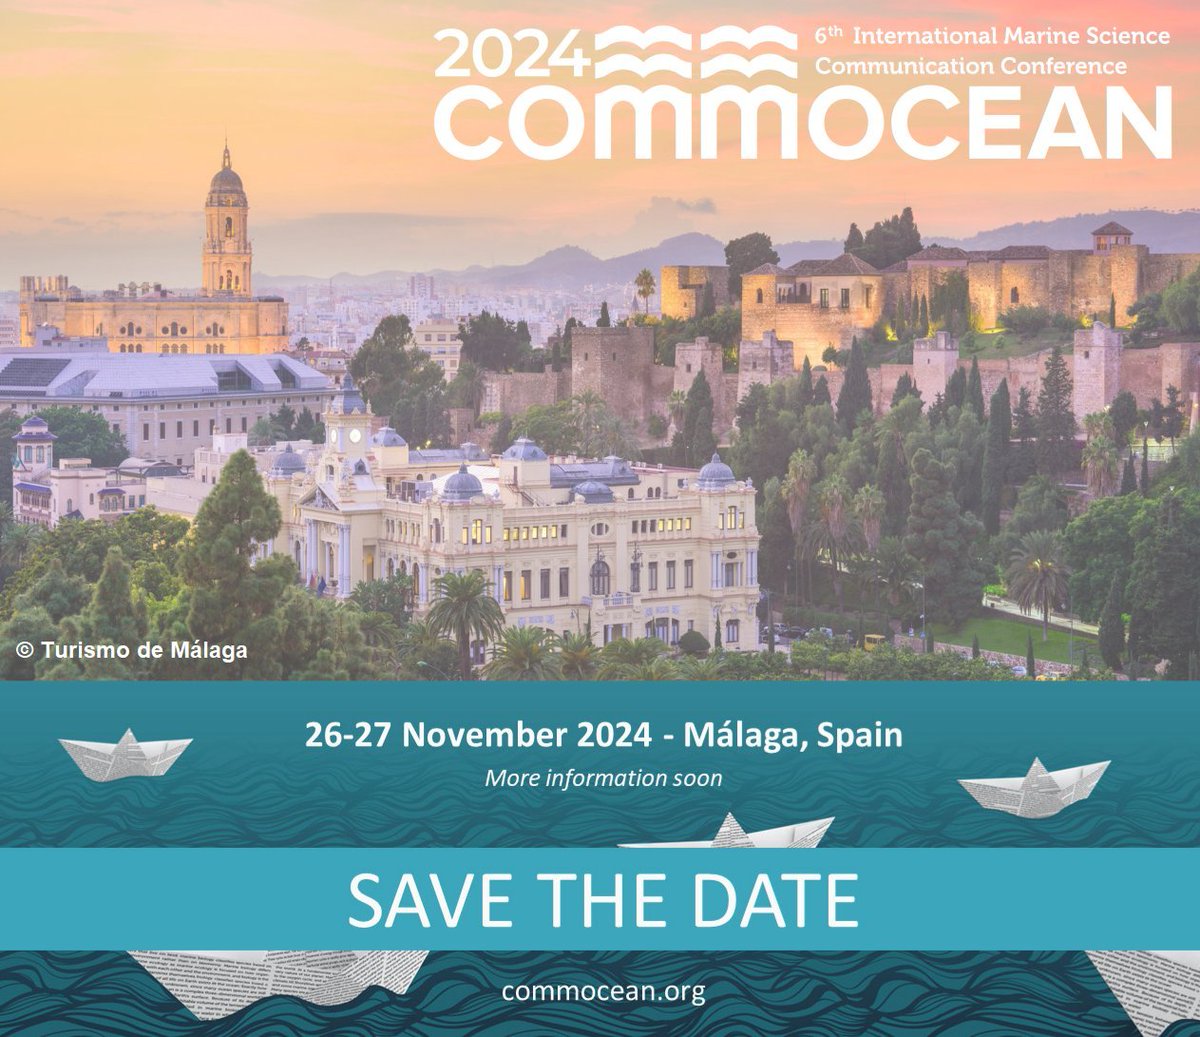 📢Save the date for @CommOceanConf! Organized by BRIDGE-BS partner @EMarineBoard contributions, #CommOCEAN2024 will connect science and society, providing hub for workshops, networking sessions and discussions on #marinescience communication. Read more: commocean.org